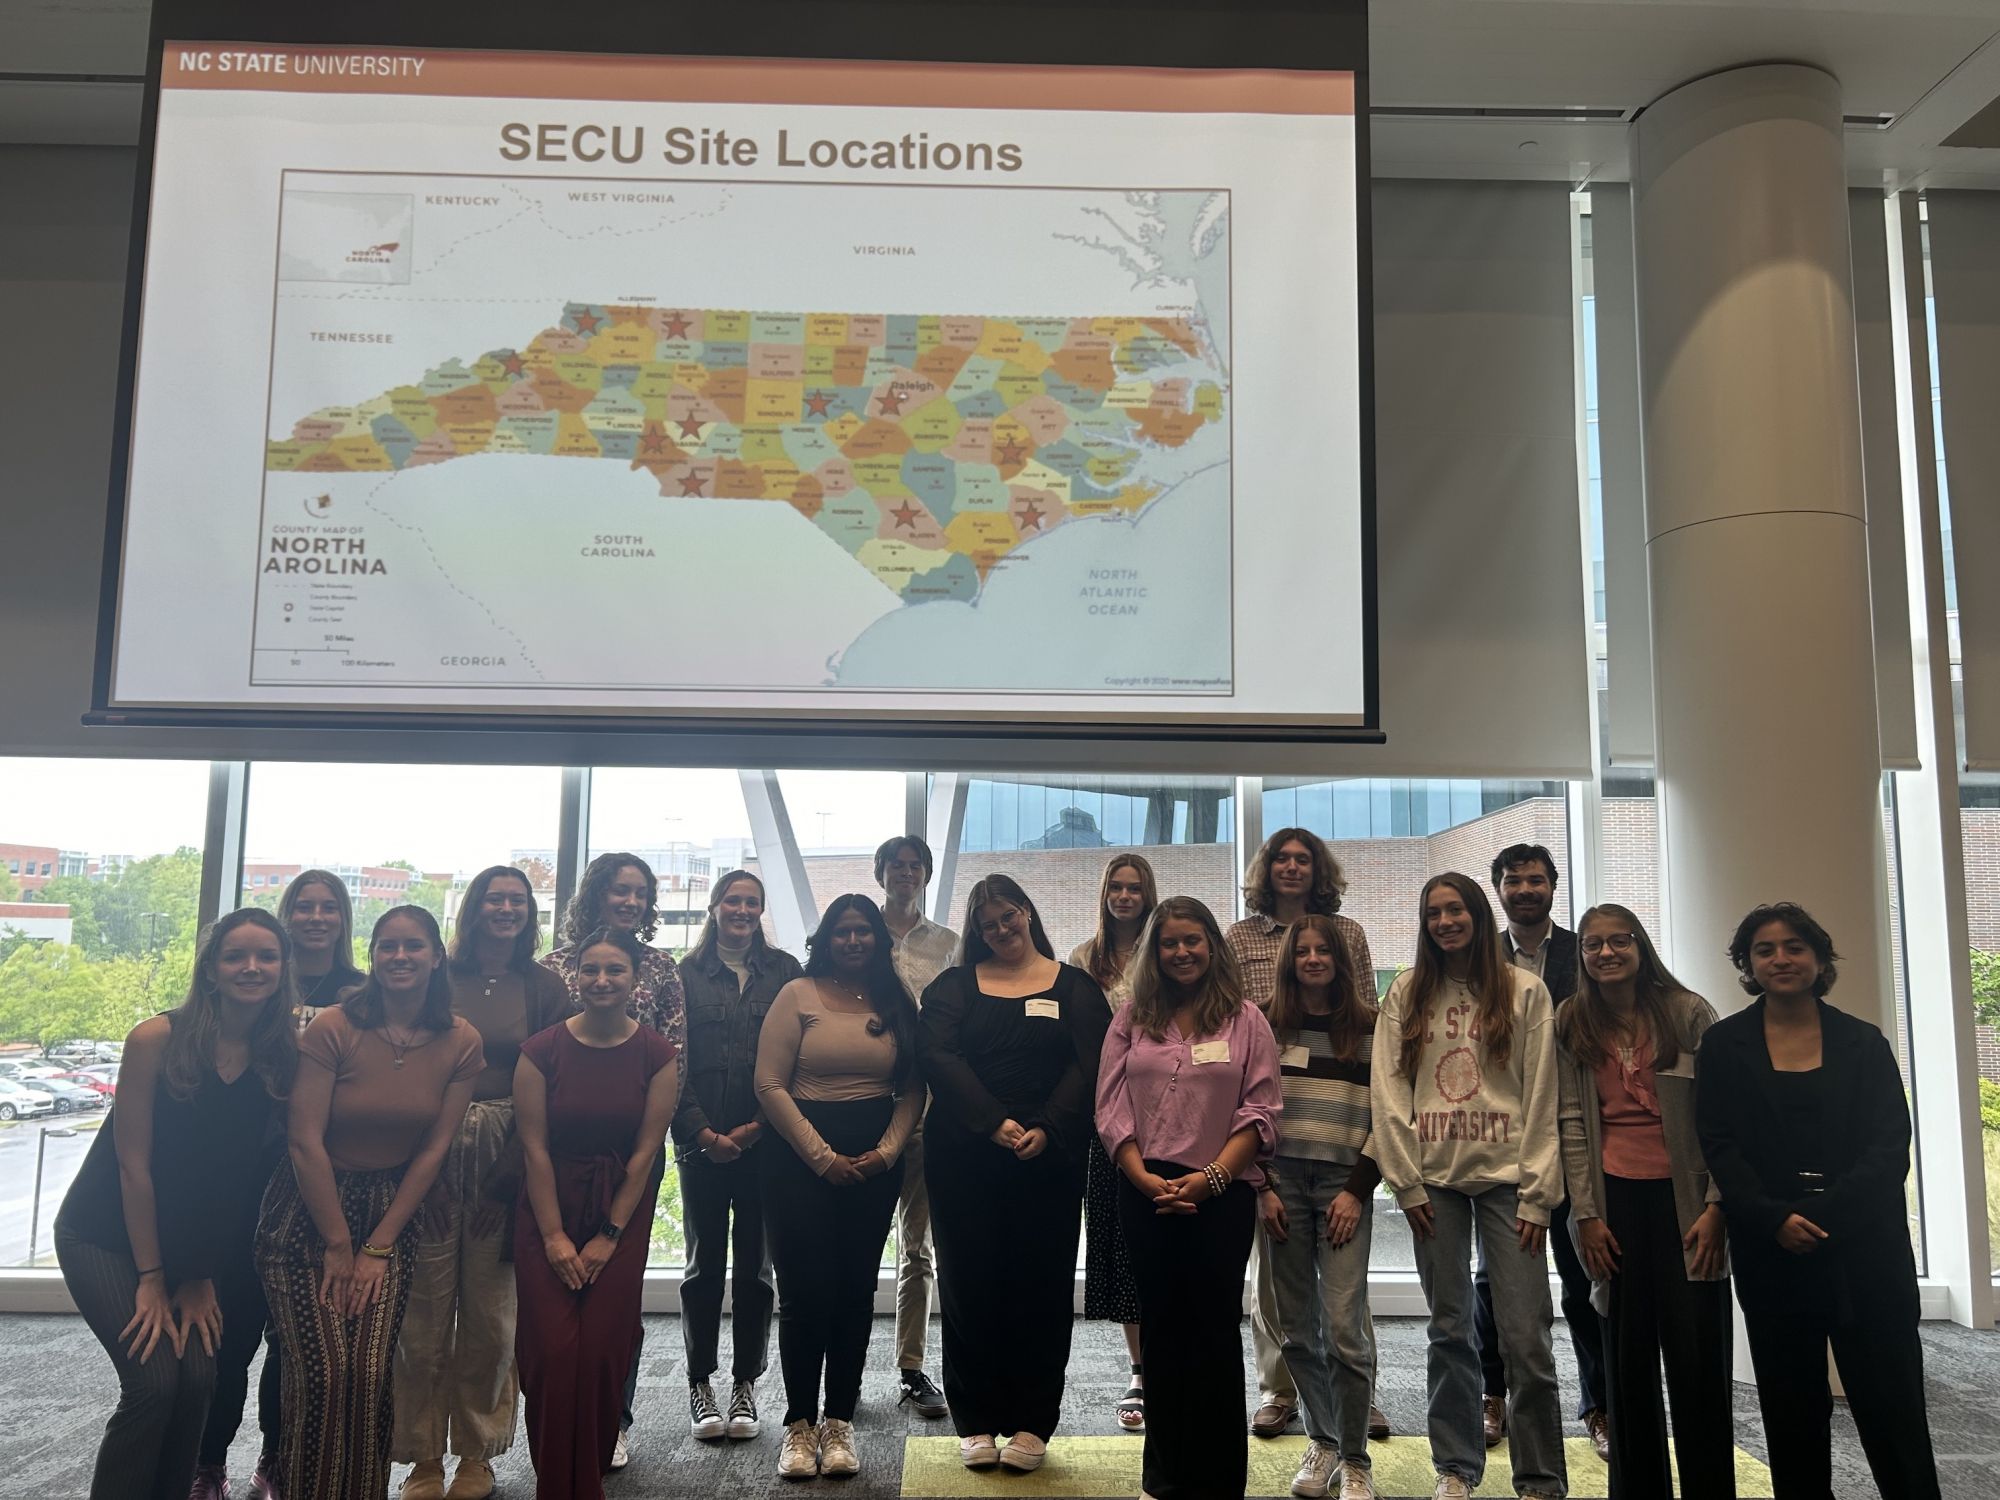 Students standing in front of a map of North Carolina, that says "SECU Site Locations."